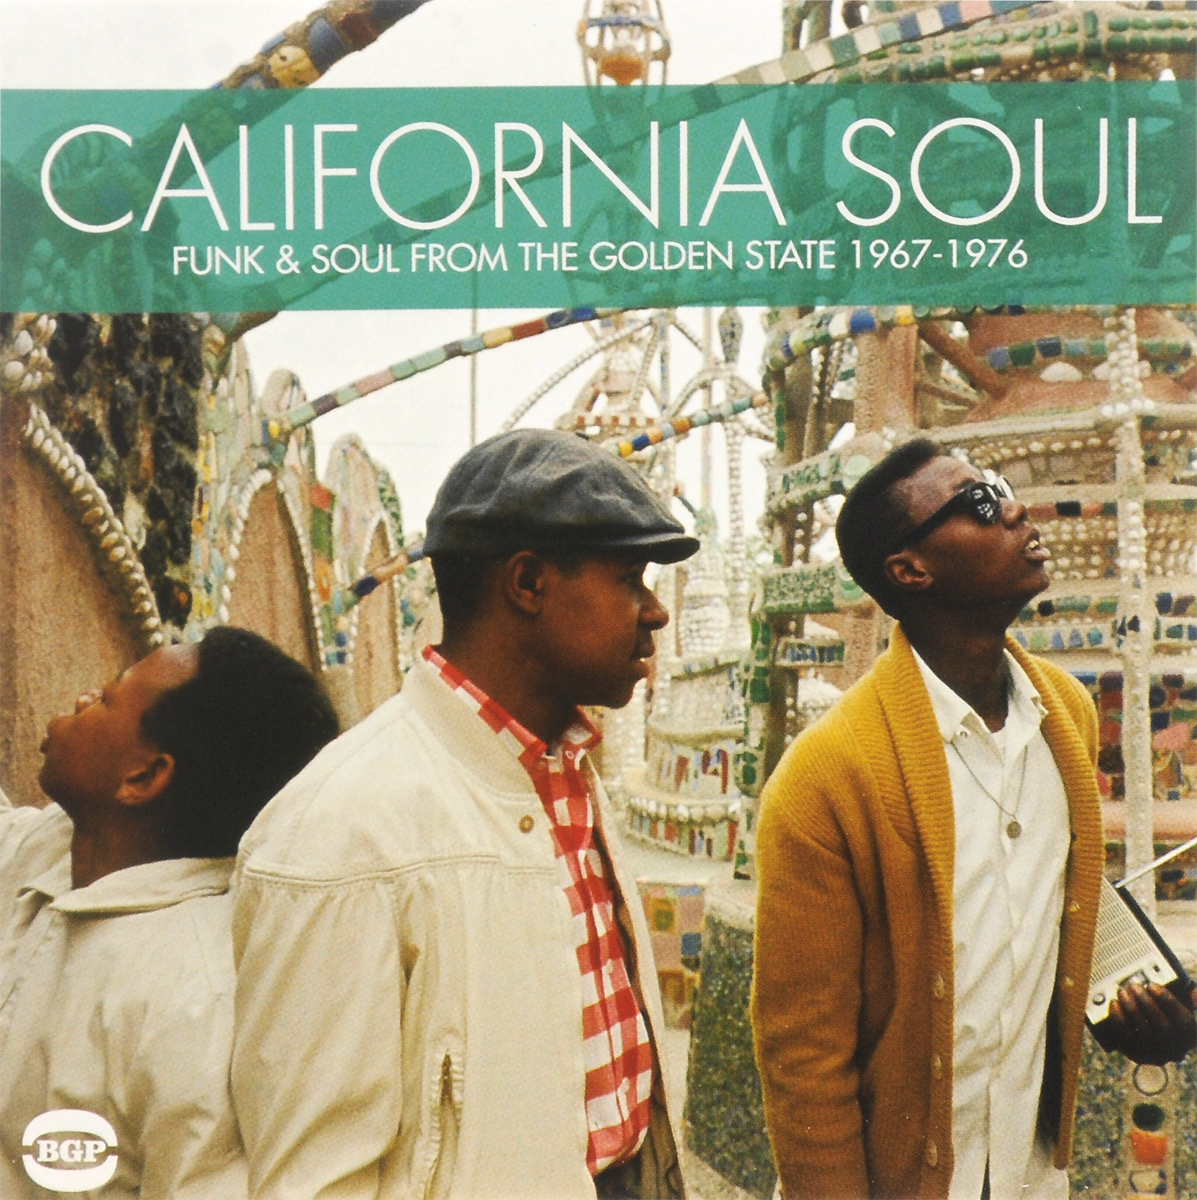 California Soul. Funk & Soul From The Golden State 1967-1976